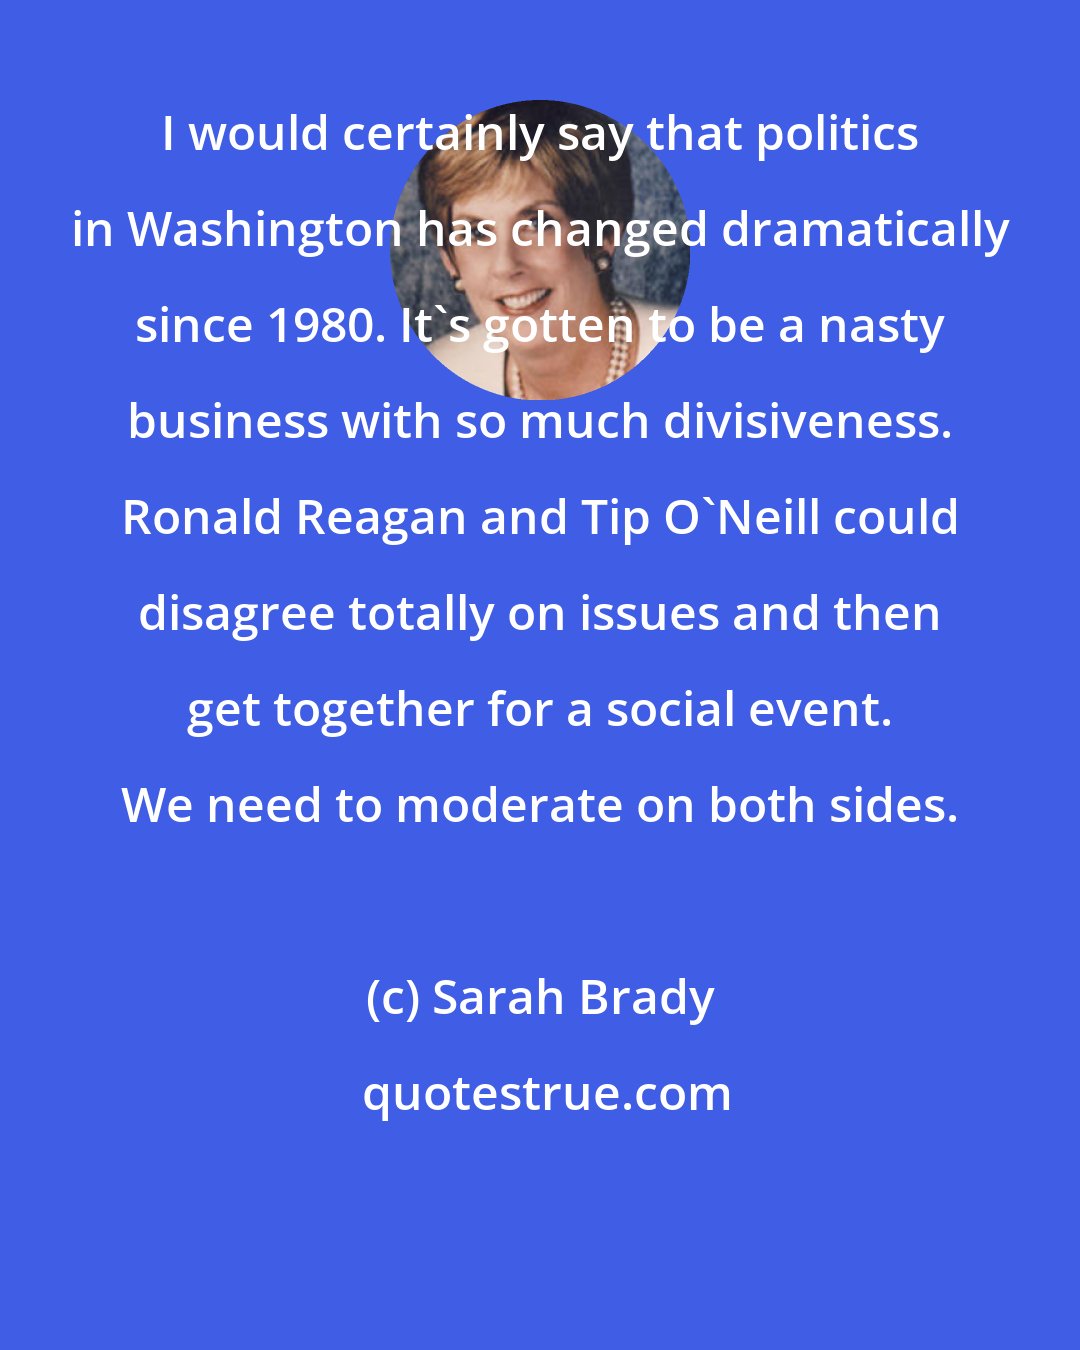 Sarah Brady: I would certainly say that politics in Washington has changed dramatically since 1980. It's gotten to be a nasty business with so much divisiveness. Ronald Reagan and Tip O'Neill could disagree totally on issues and then get together for a social event. We need to moderate on both sides.